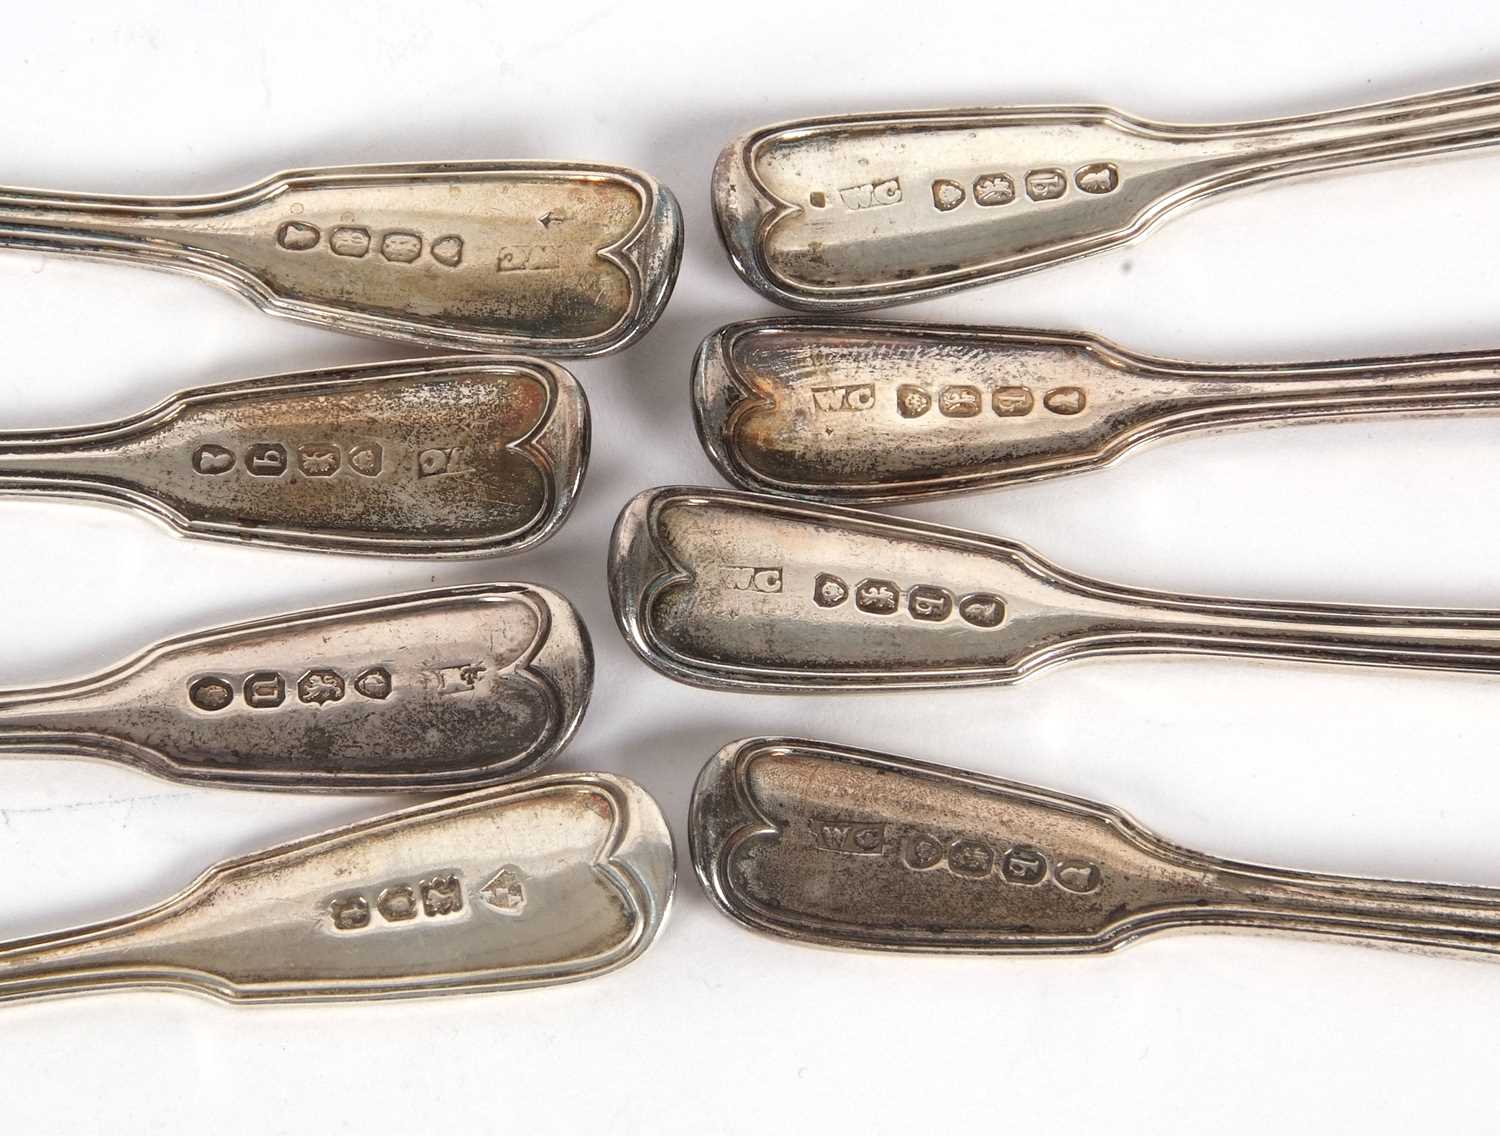 Six William IV silver teaspoons, fiddle and thread pattern, engraved with a demi-lion, London 1831 - Image 4 of 4